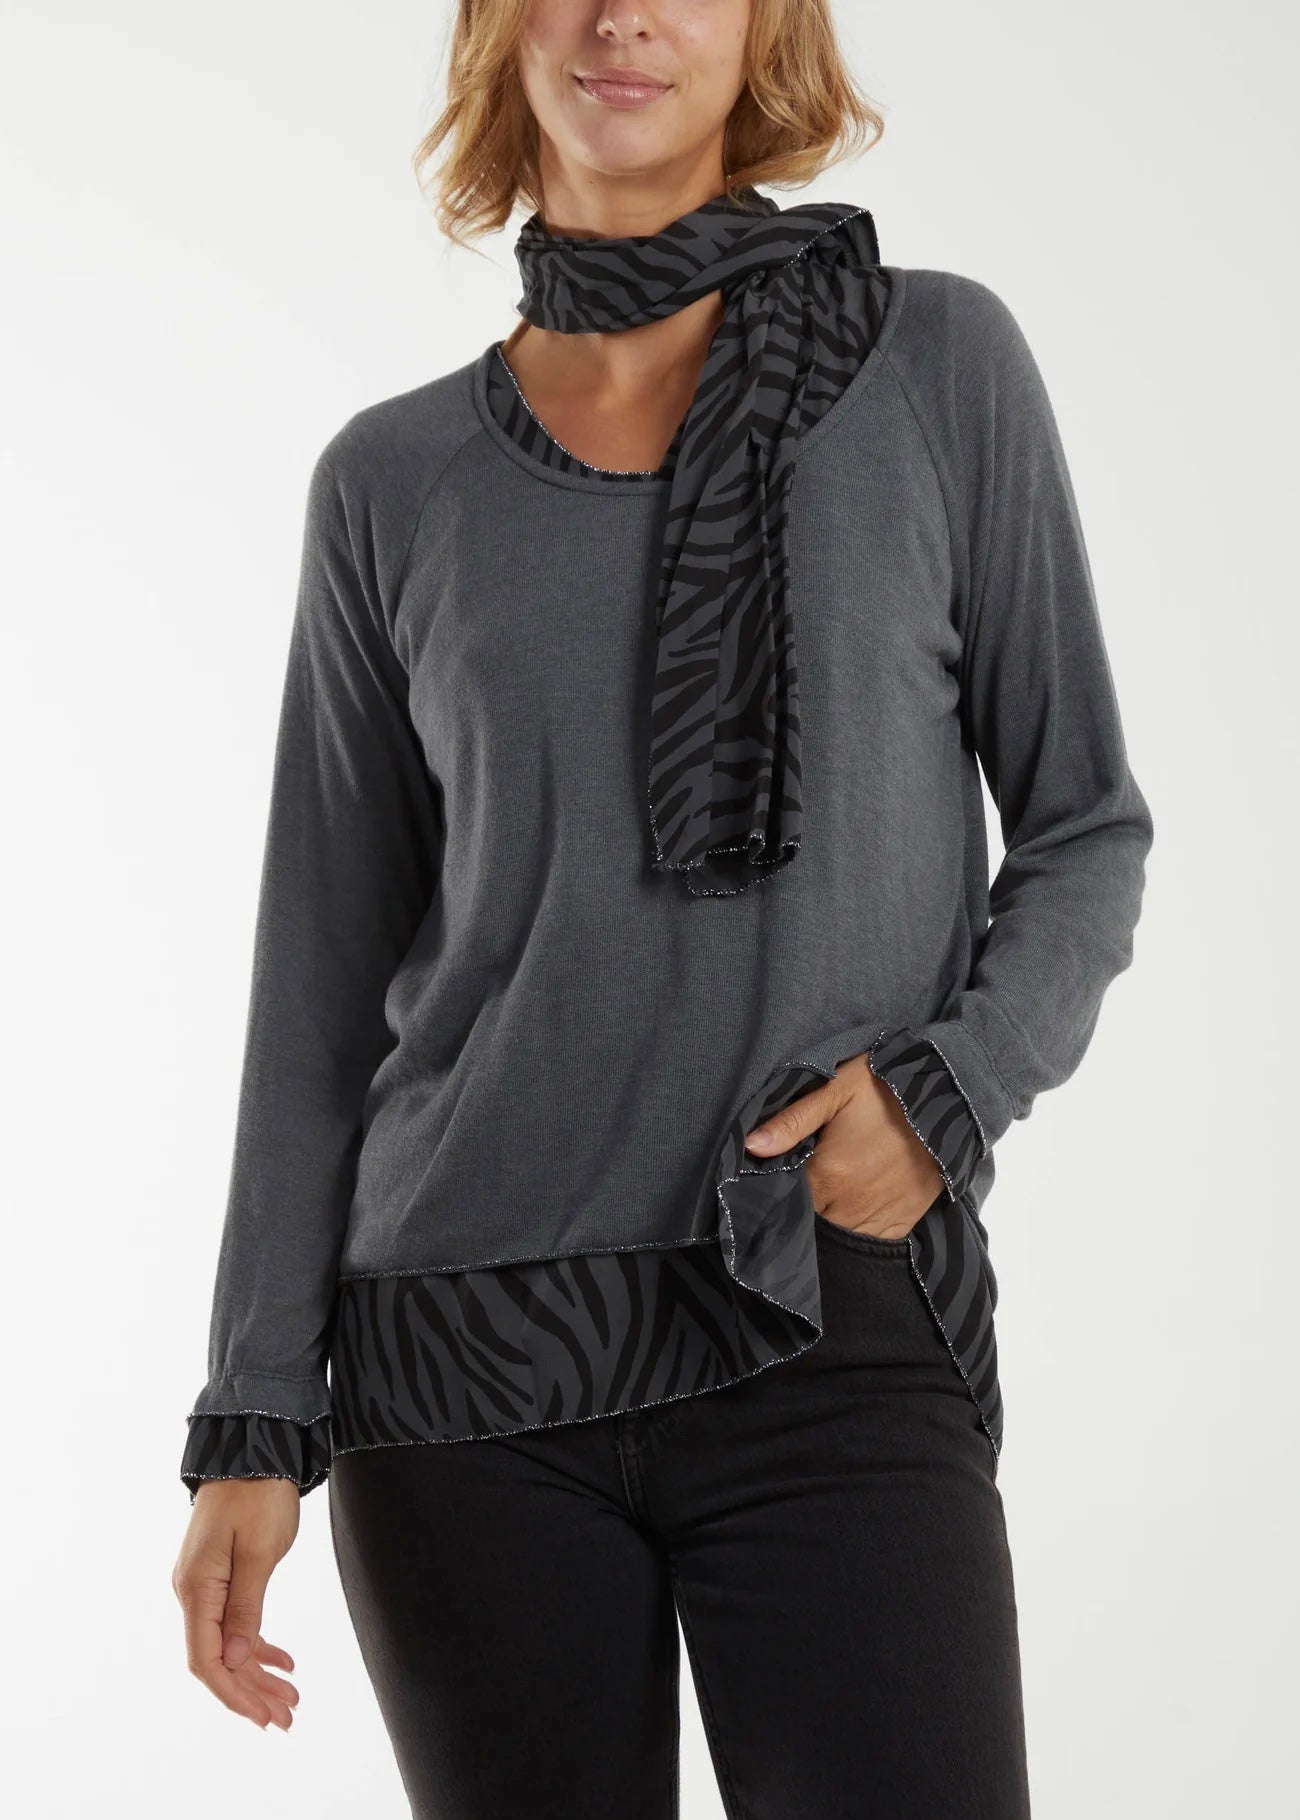 Sands - Double Layer Animal Print top with Scarf / Charcoal